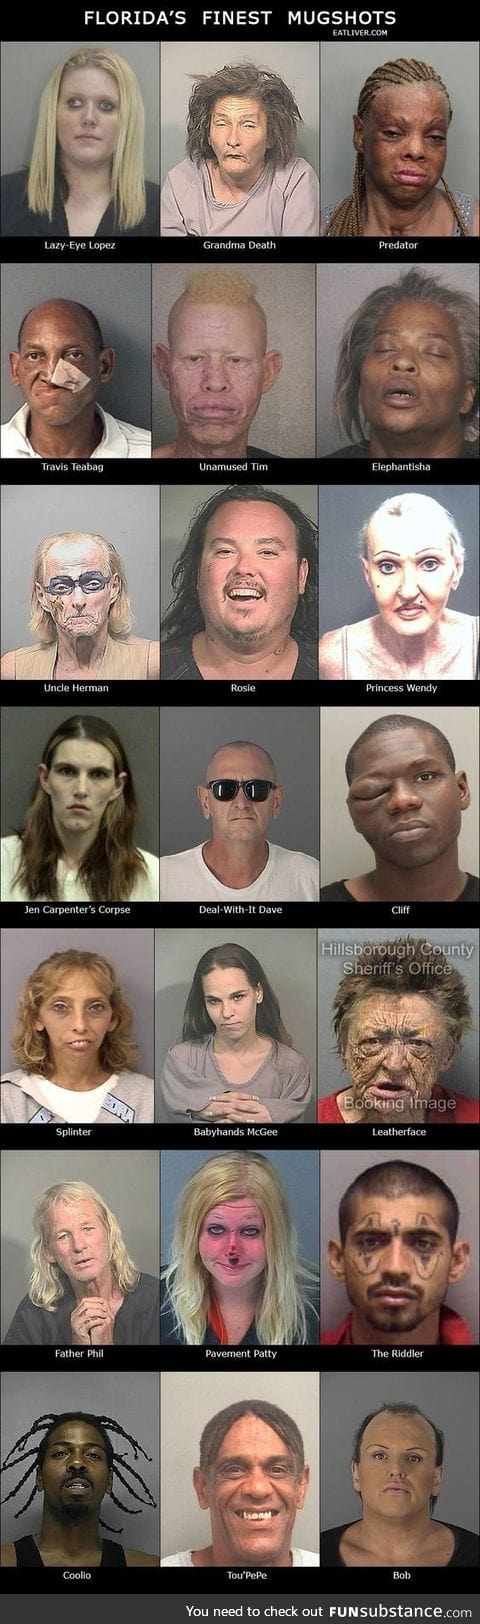 Florida Man's Extended Family